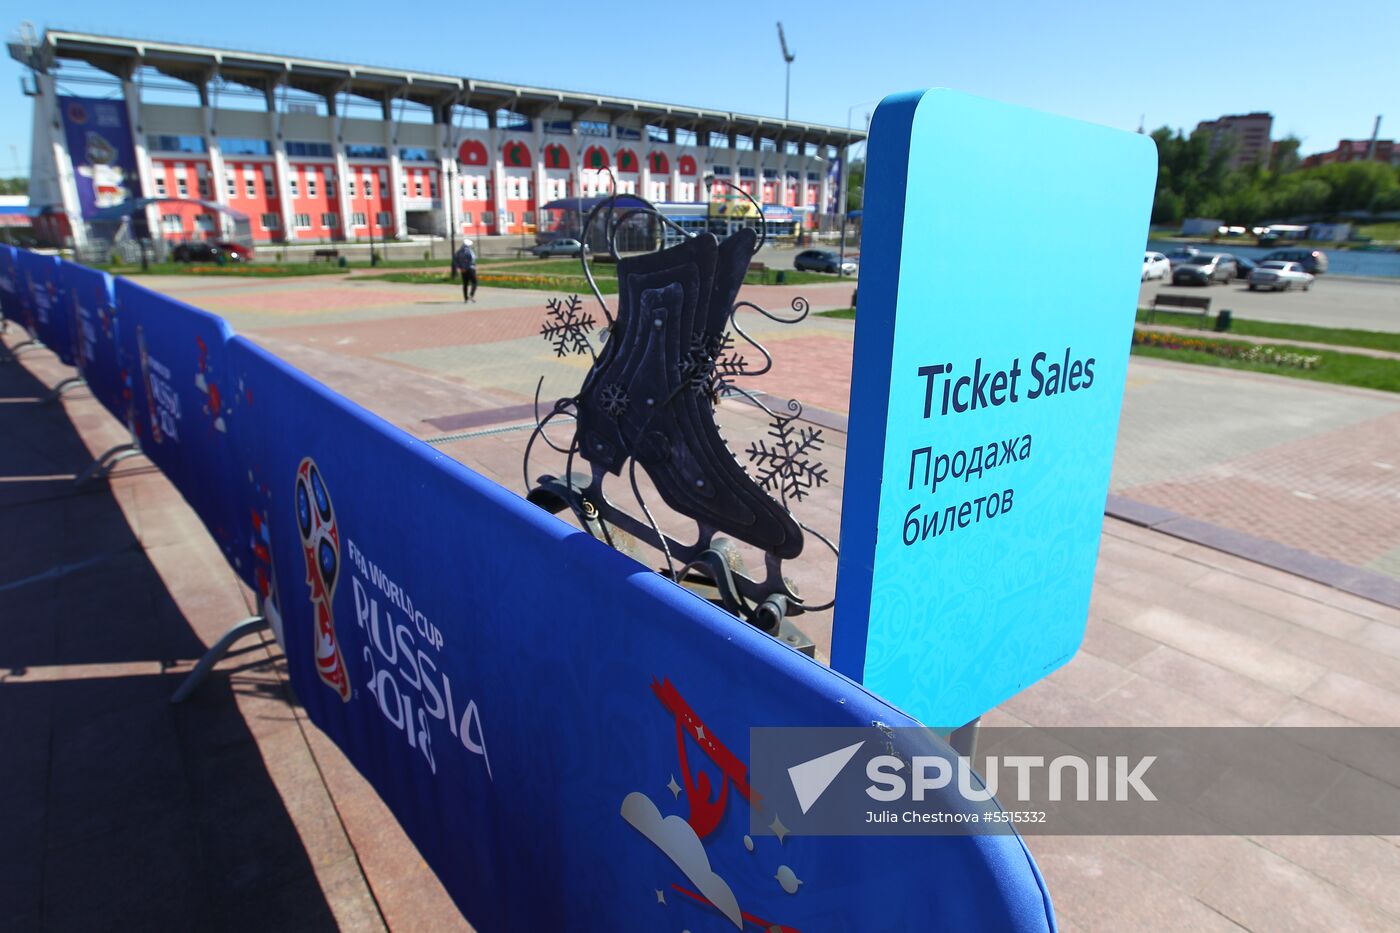 Preparations for 2018 World Cup in Saransk